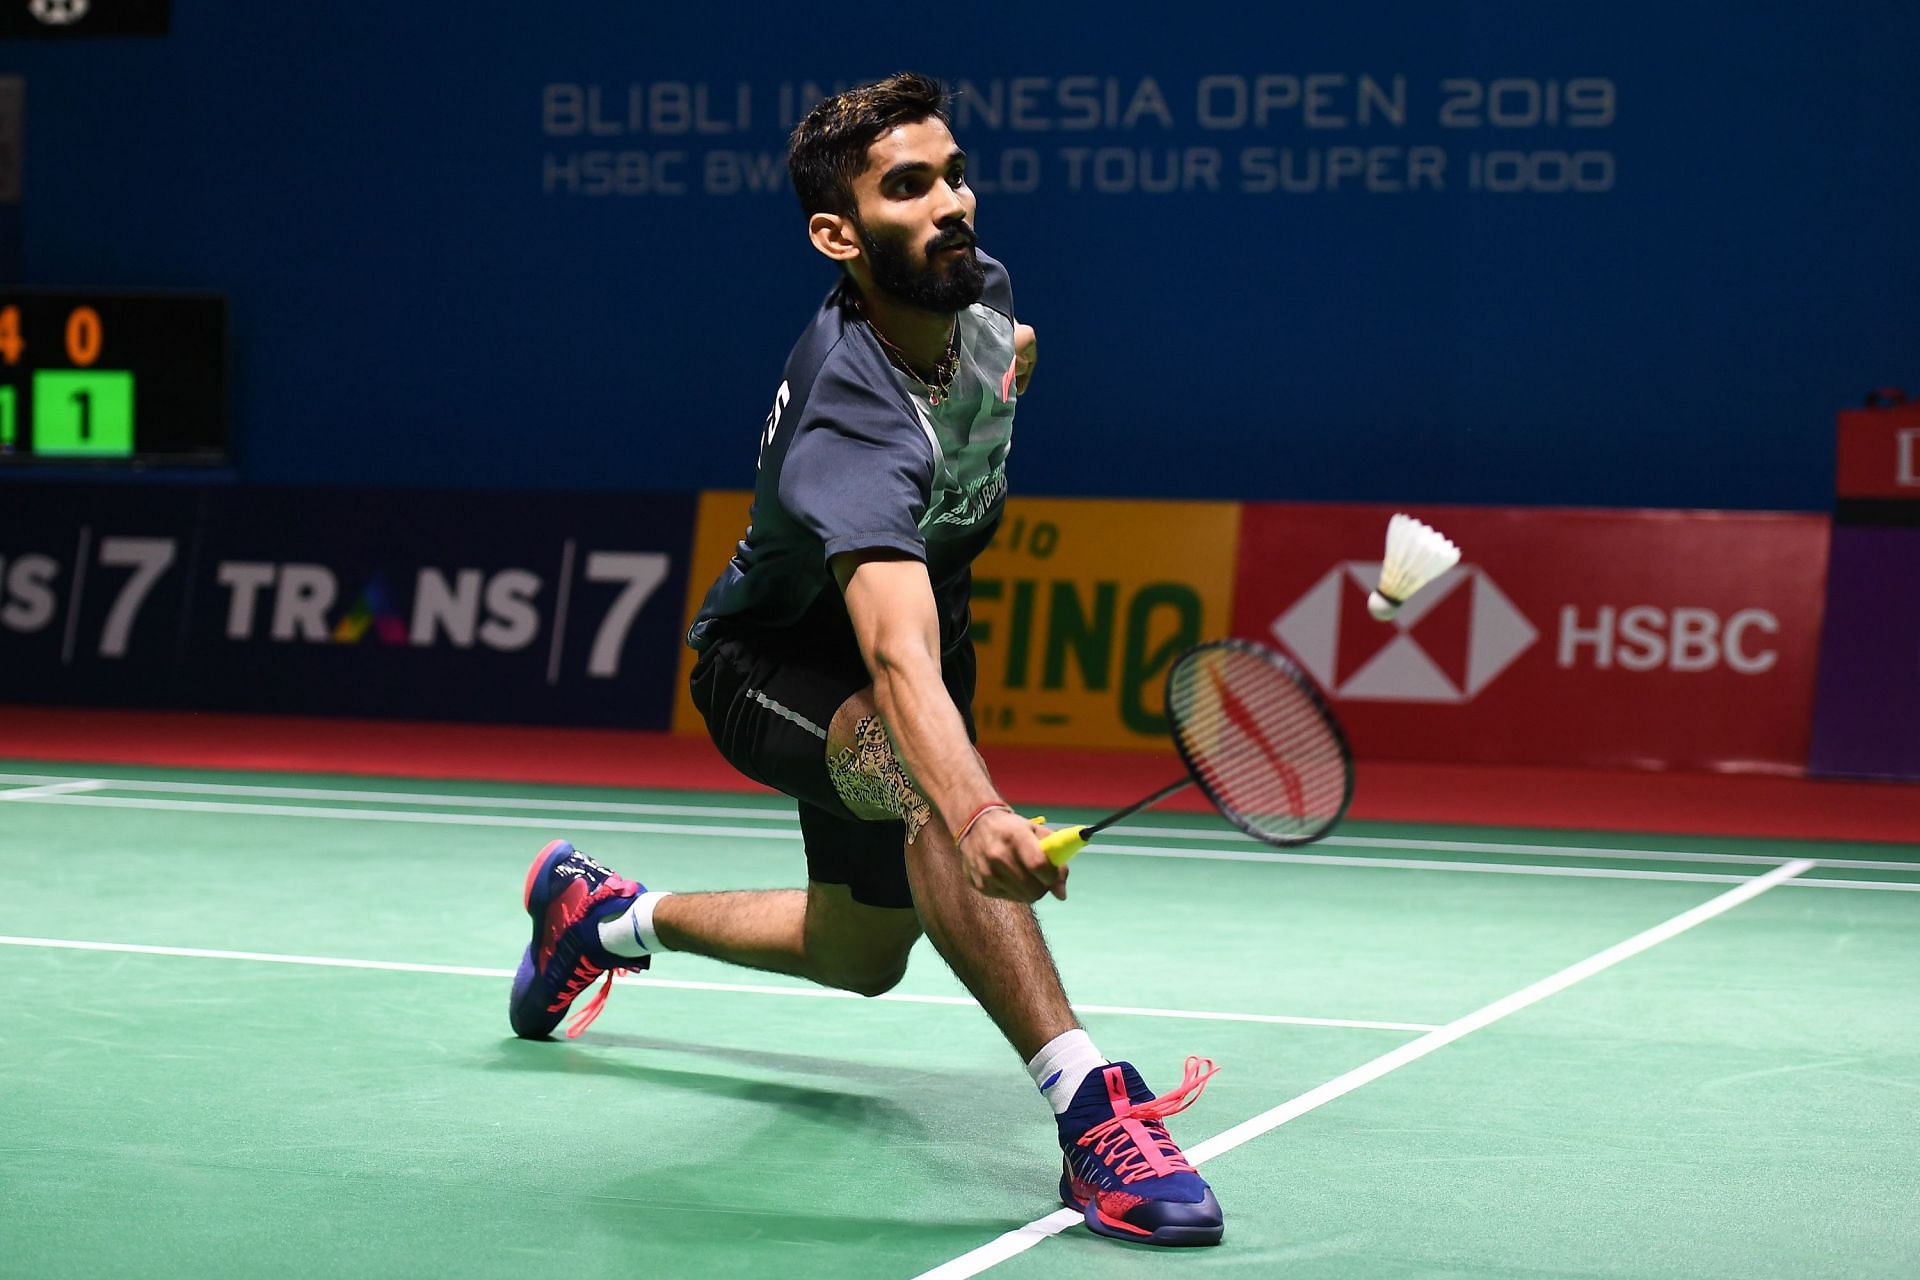 BWF World Championships 2021, Kidambi Srikanth vs Lu Guang Zu Where to watch, TV schedule, live stream details, and more